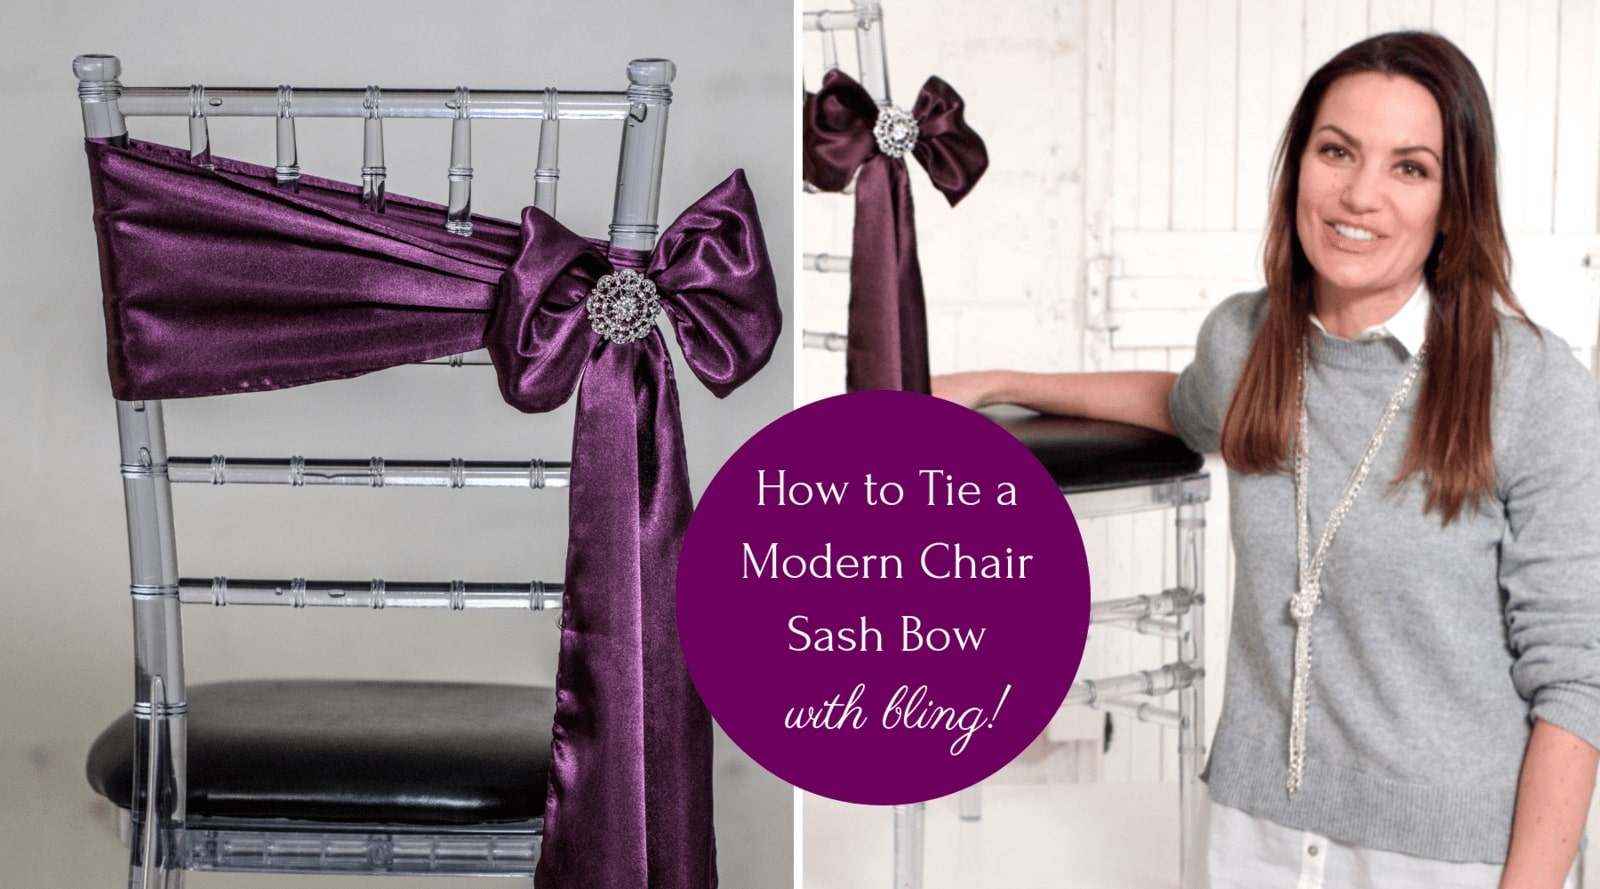 How to Tie a Chair Sash - The Angled Bow Method